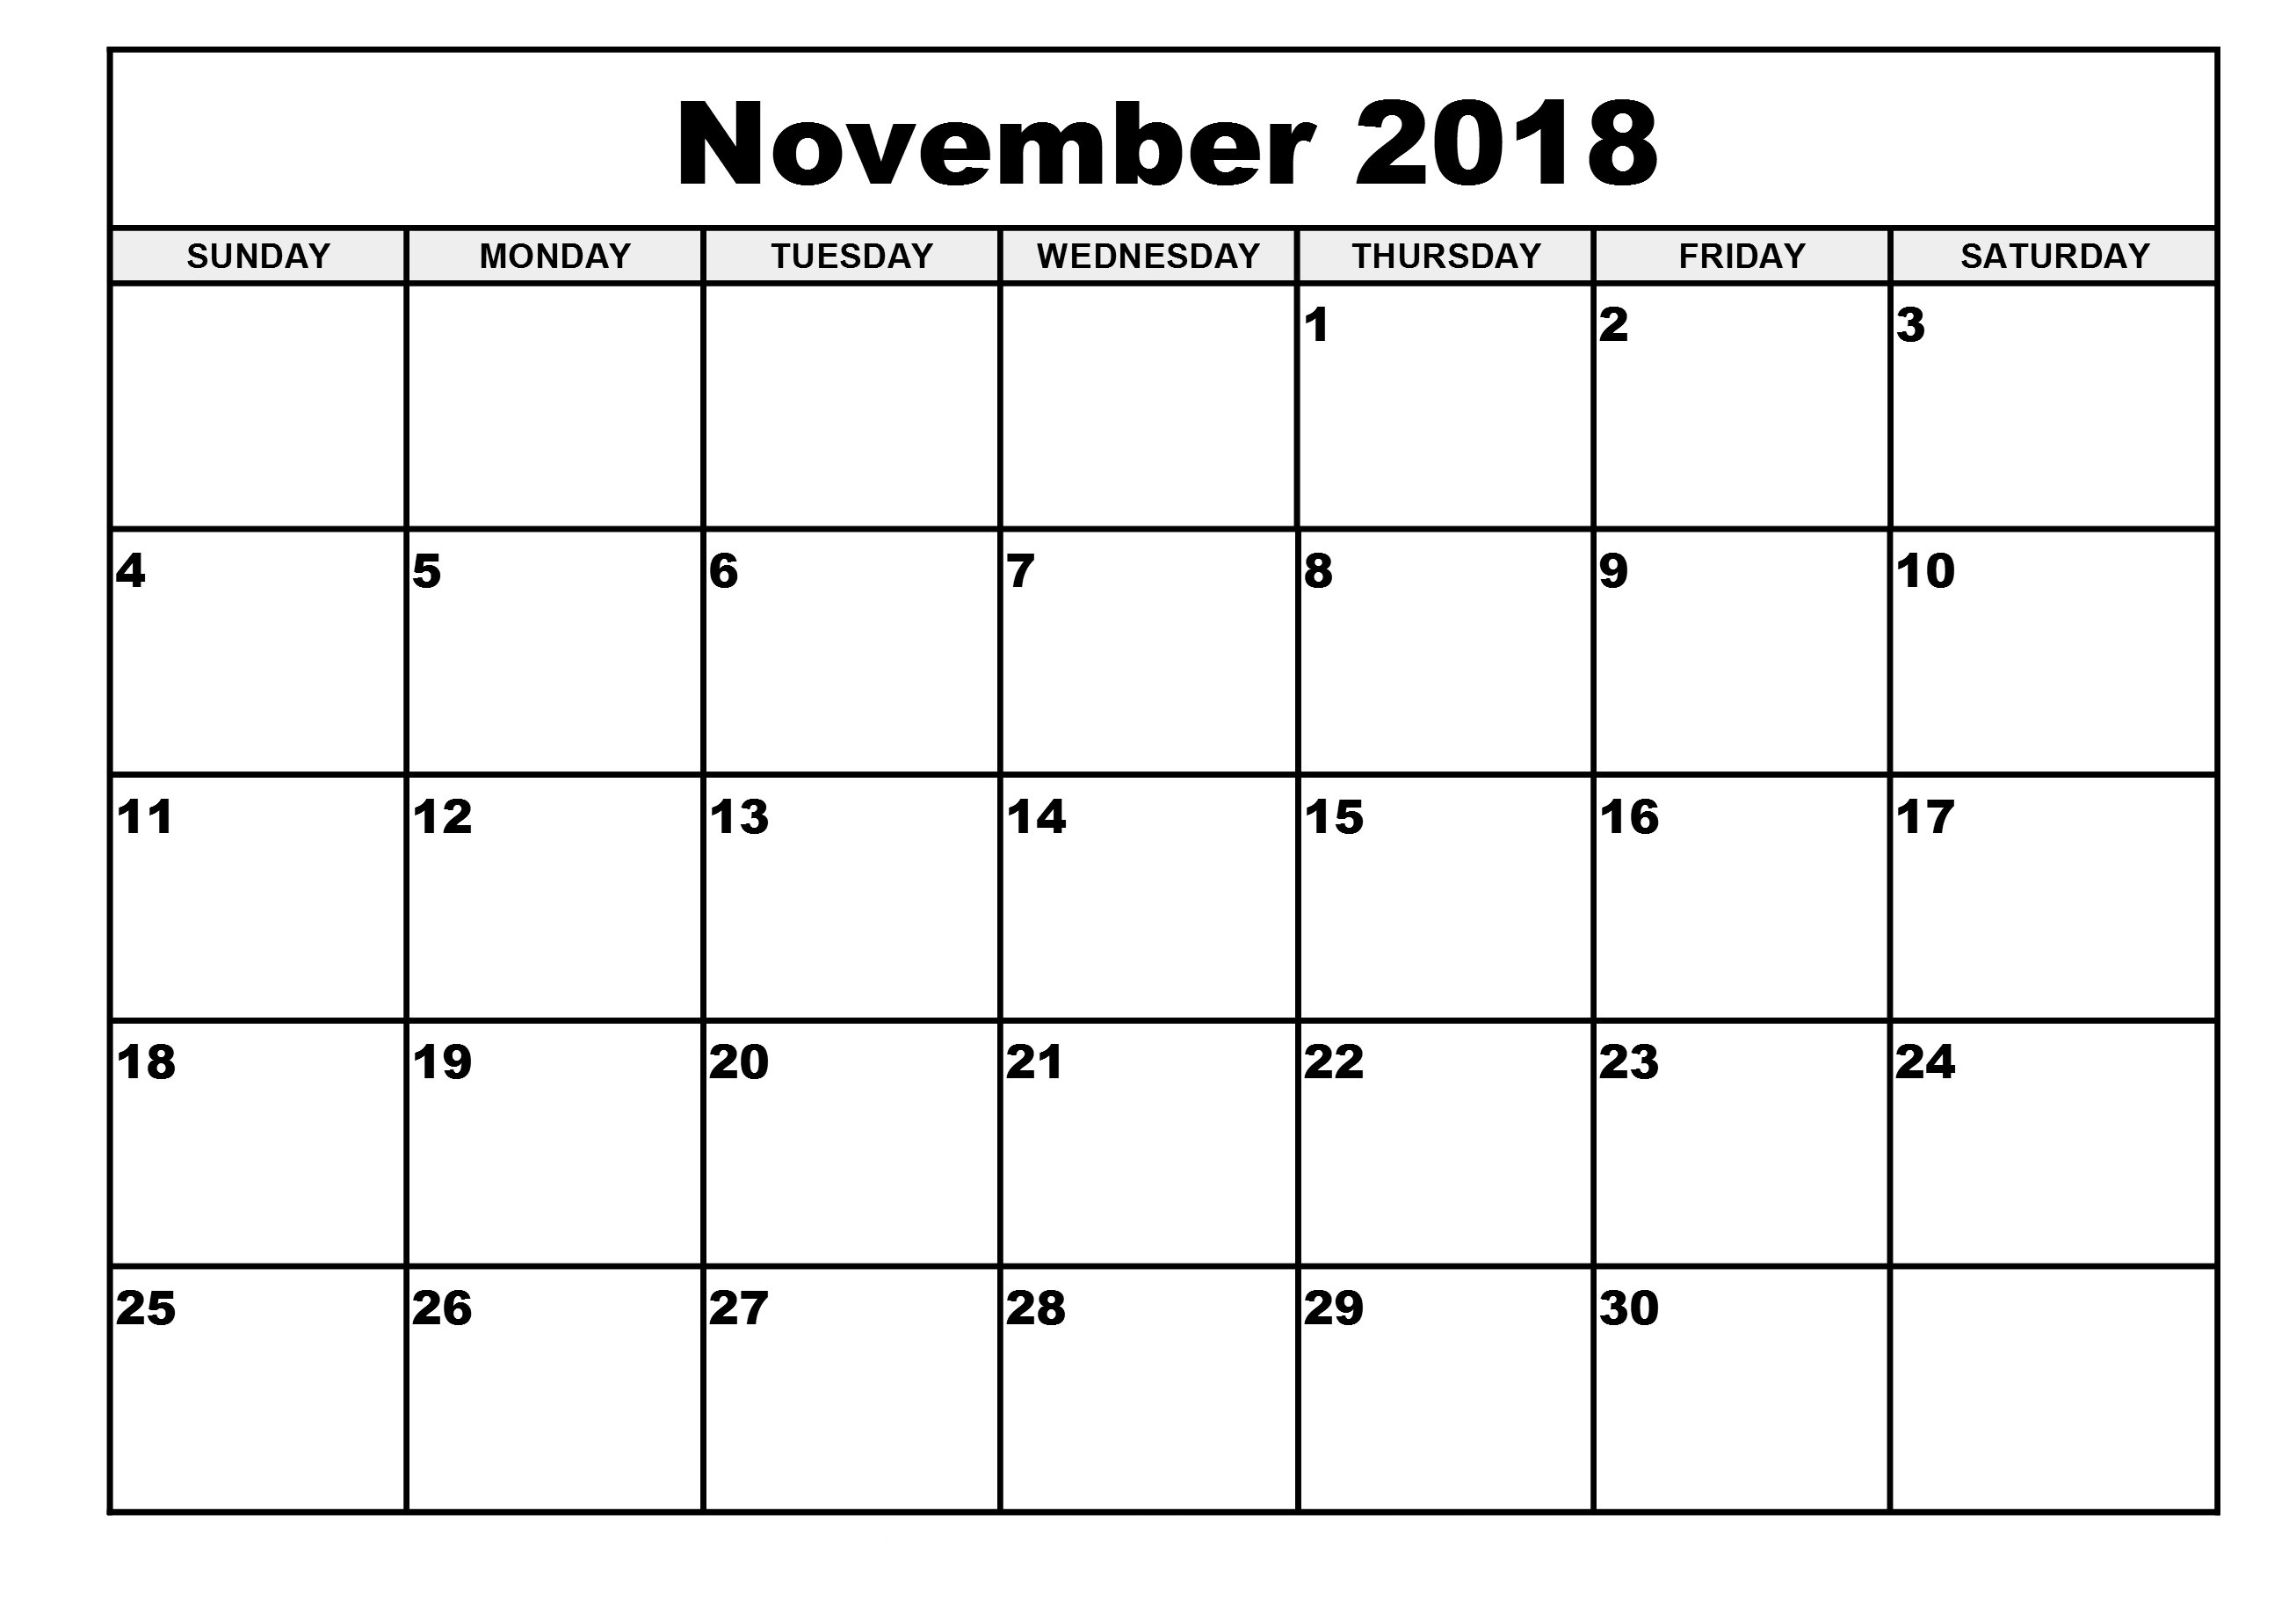 November 2018 Calendar | November Calendar 2018, November 2018 Calendar Month View Printable